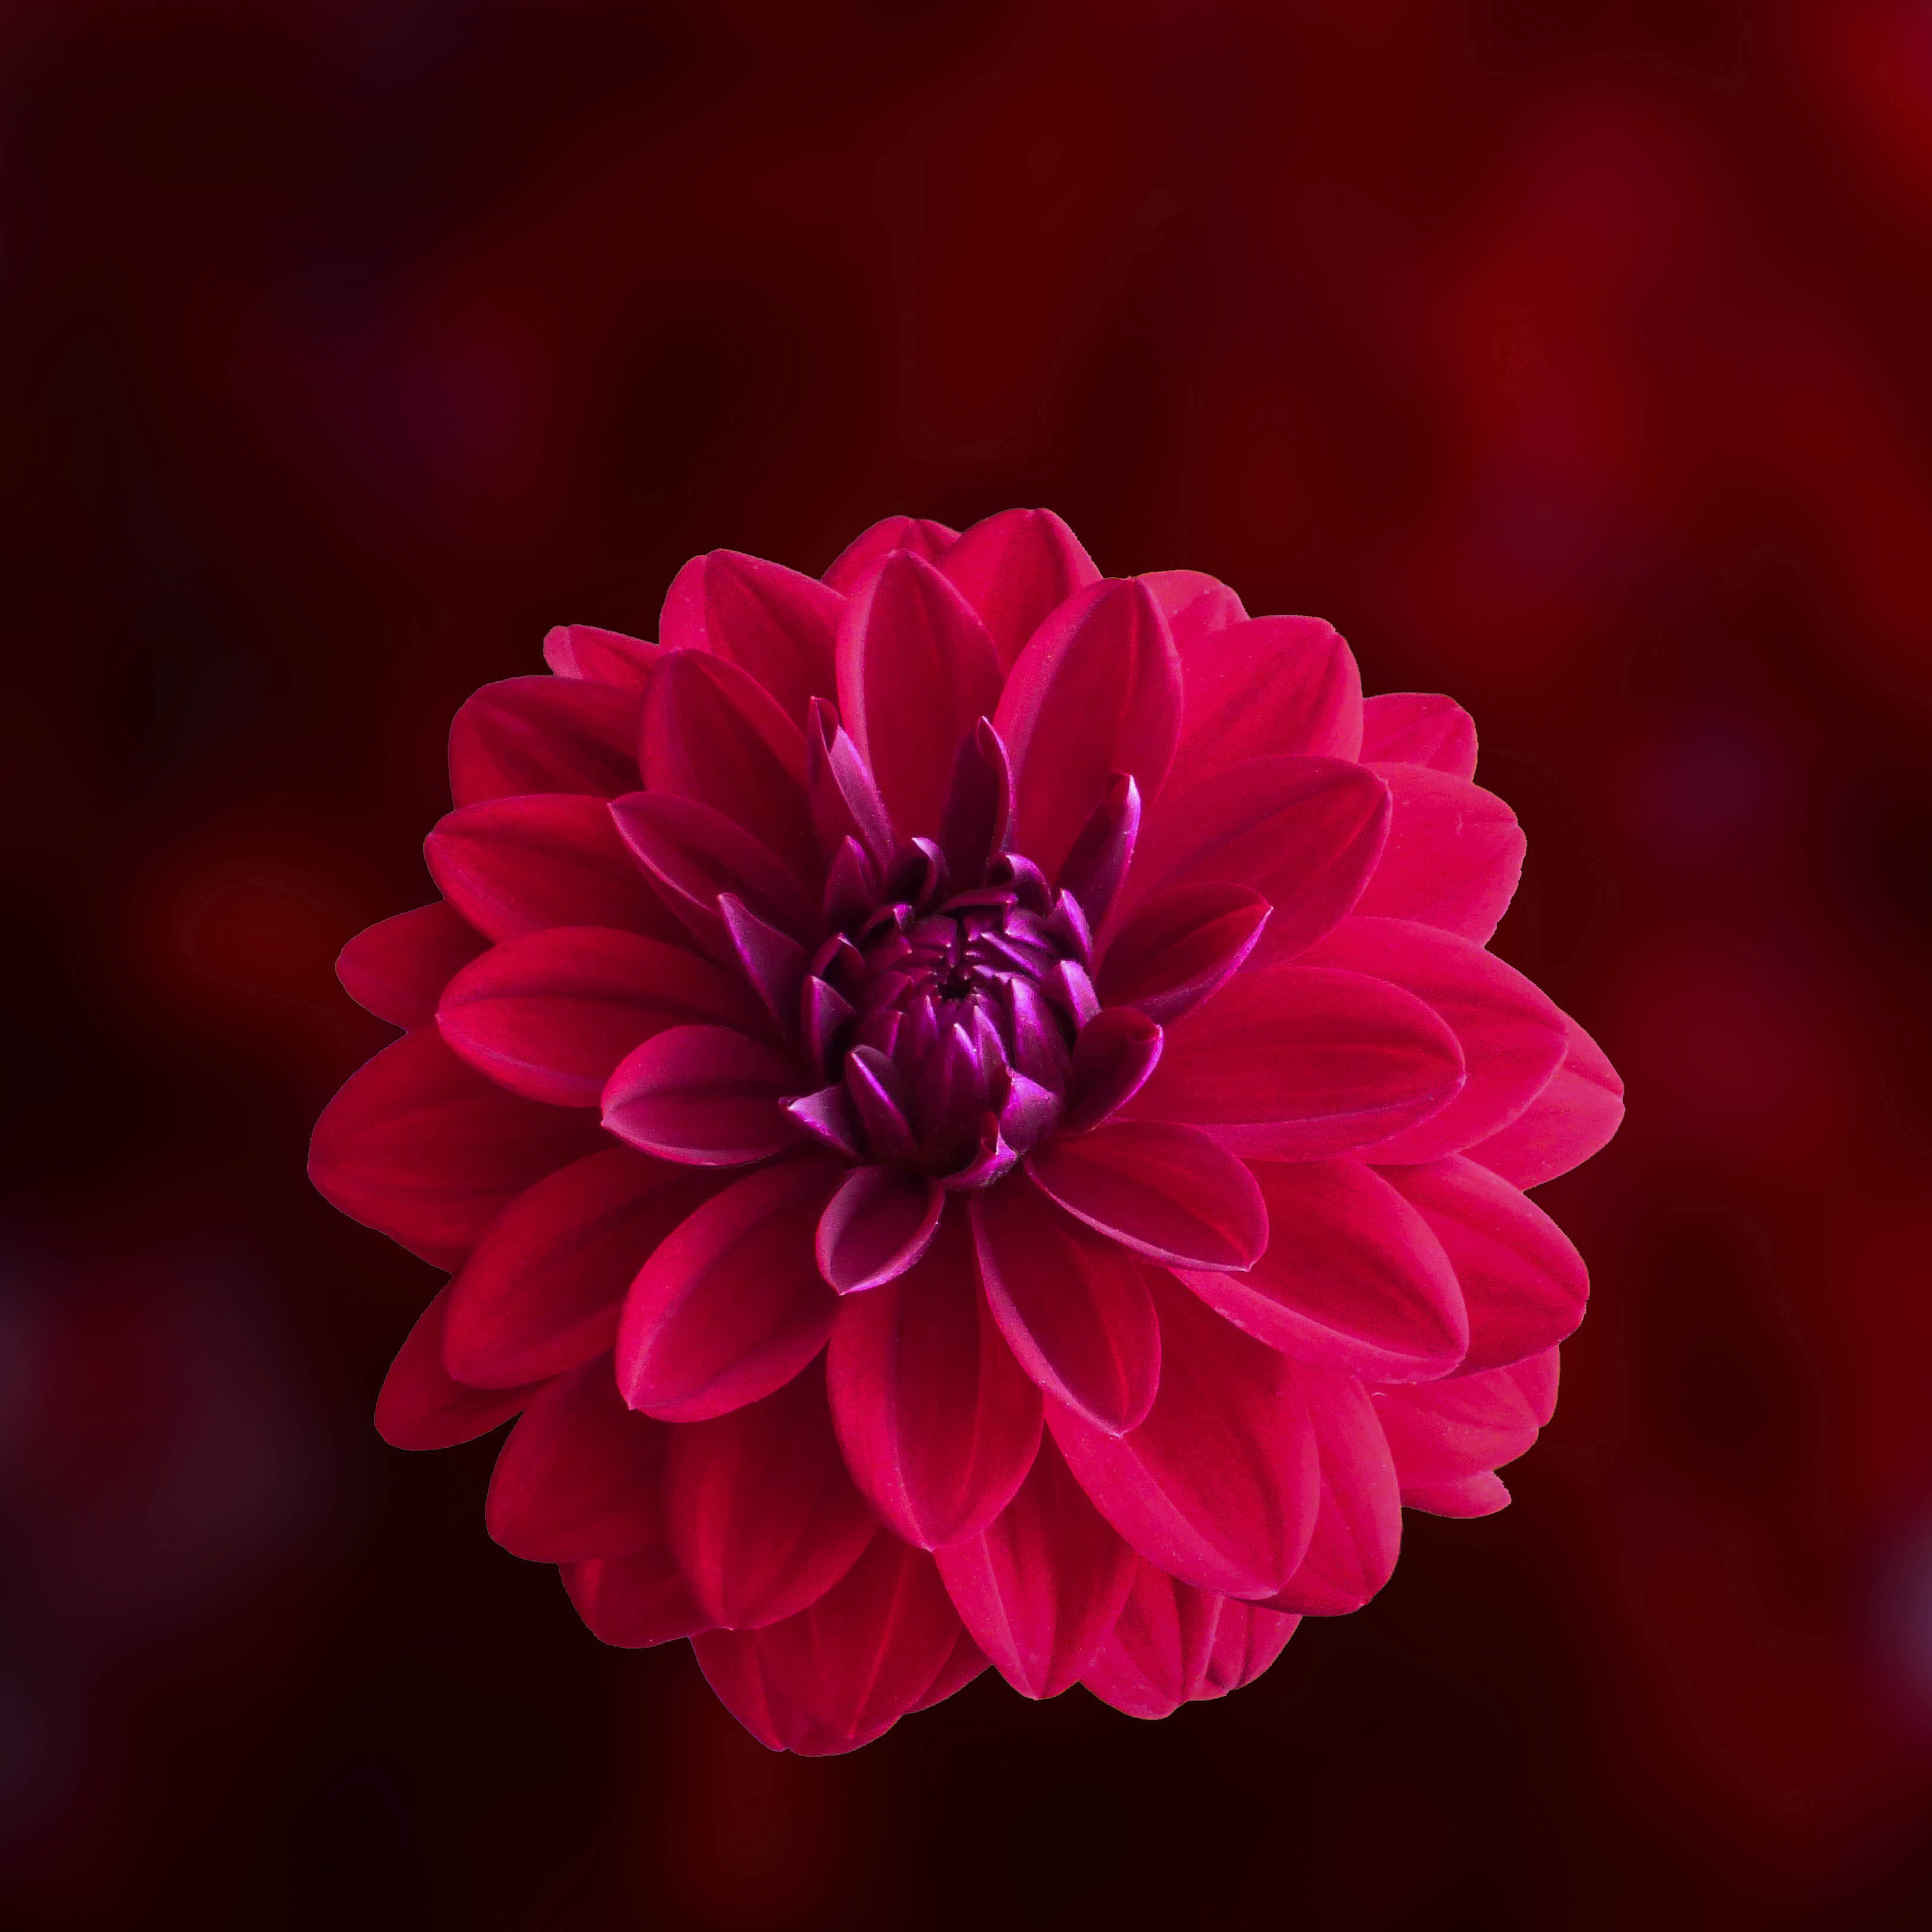 Pink Dahlia Flower iPad Pro Retina Display HD 4k Wallpaper, Image, Background, Photo and Picture